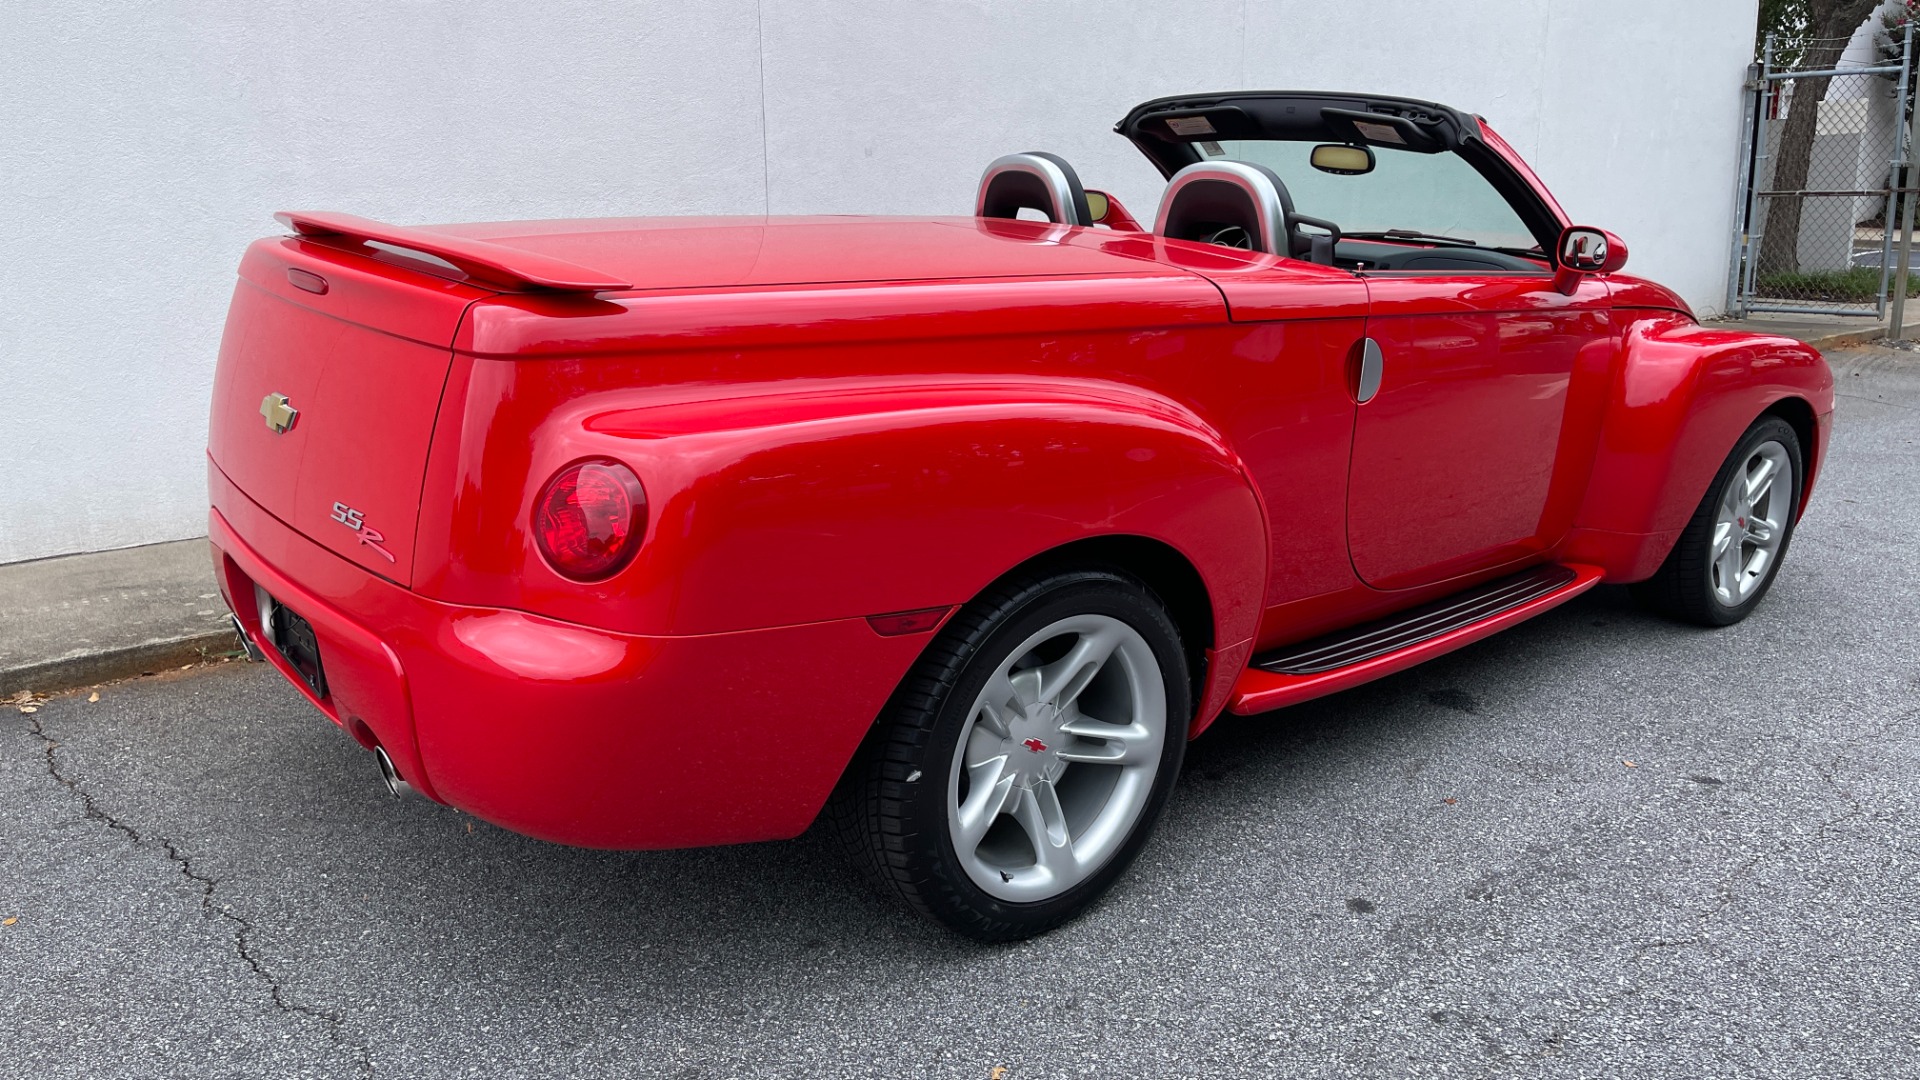 Used 2004 Chevrolet SSR LS / CONVERTIBLE / 5.3L V8 / LEATHER / HEATED SEATS / BACKUP CAMERA for sale Sold at Formula Imports in Charlotte NC 28227 5